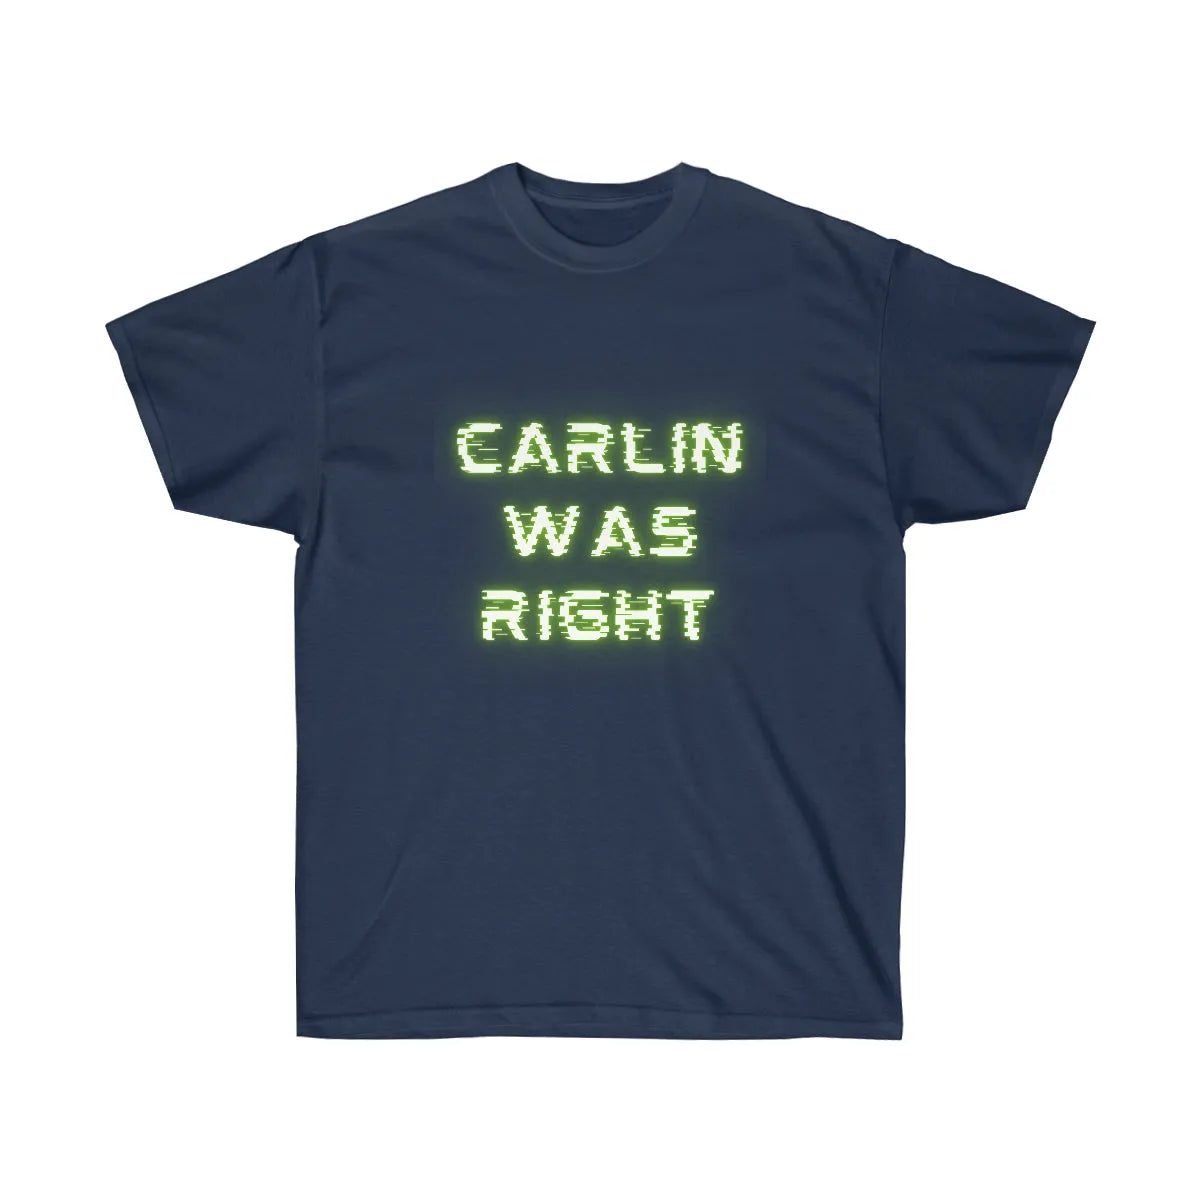 "Carlin Was Right" Cotton Tee